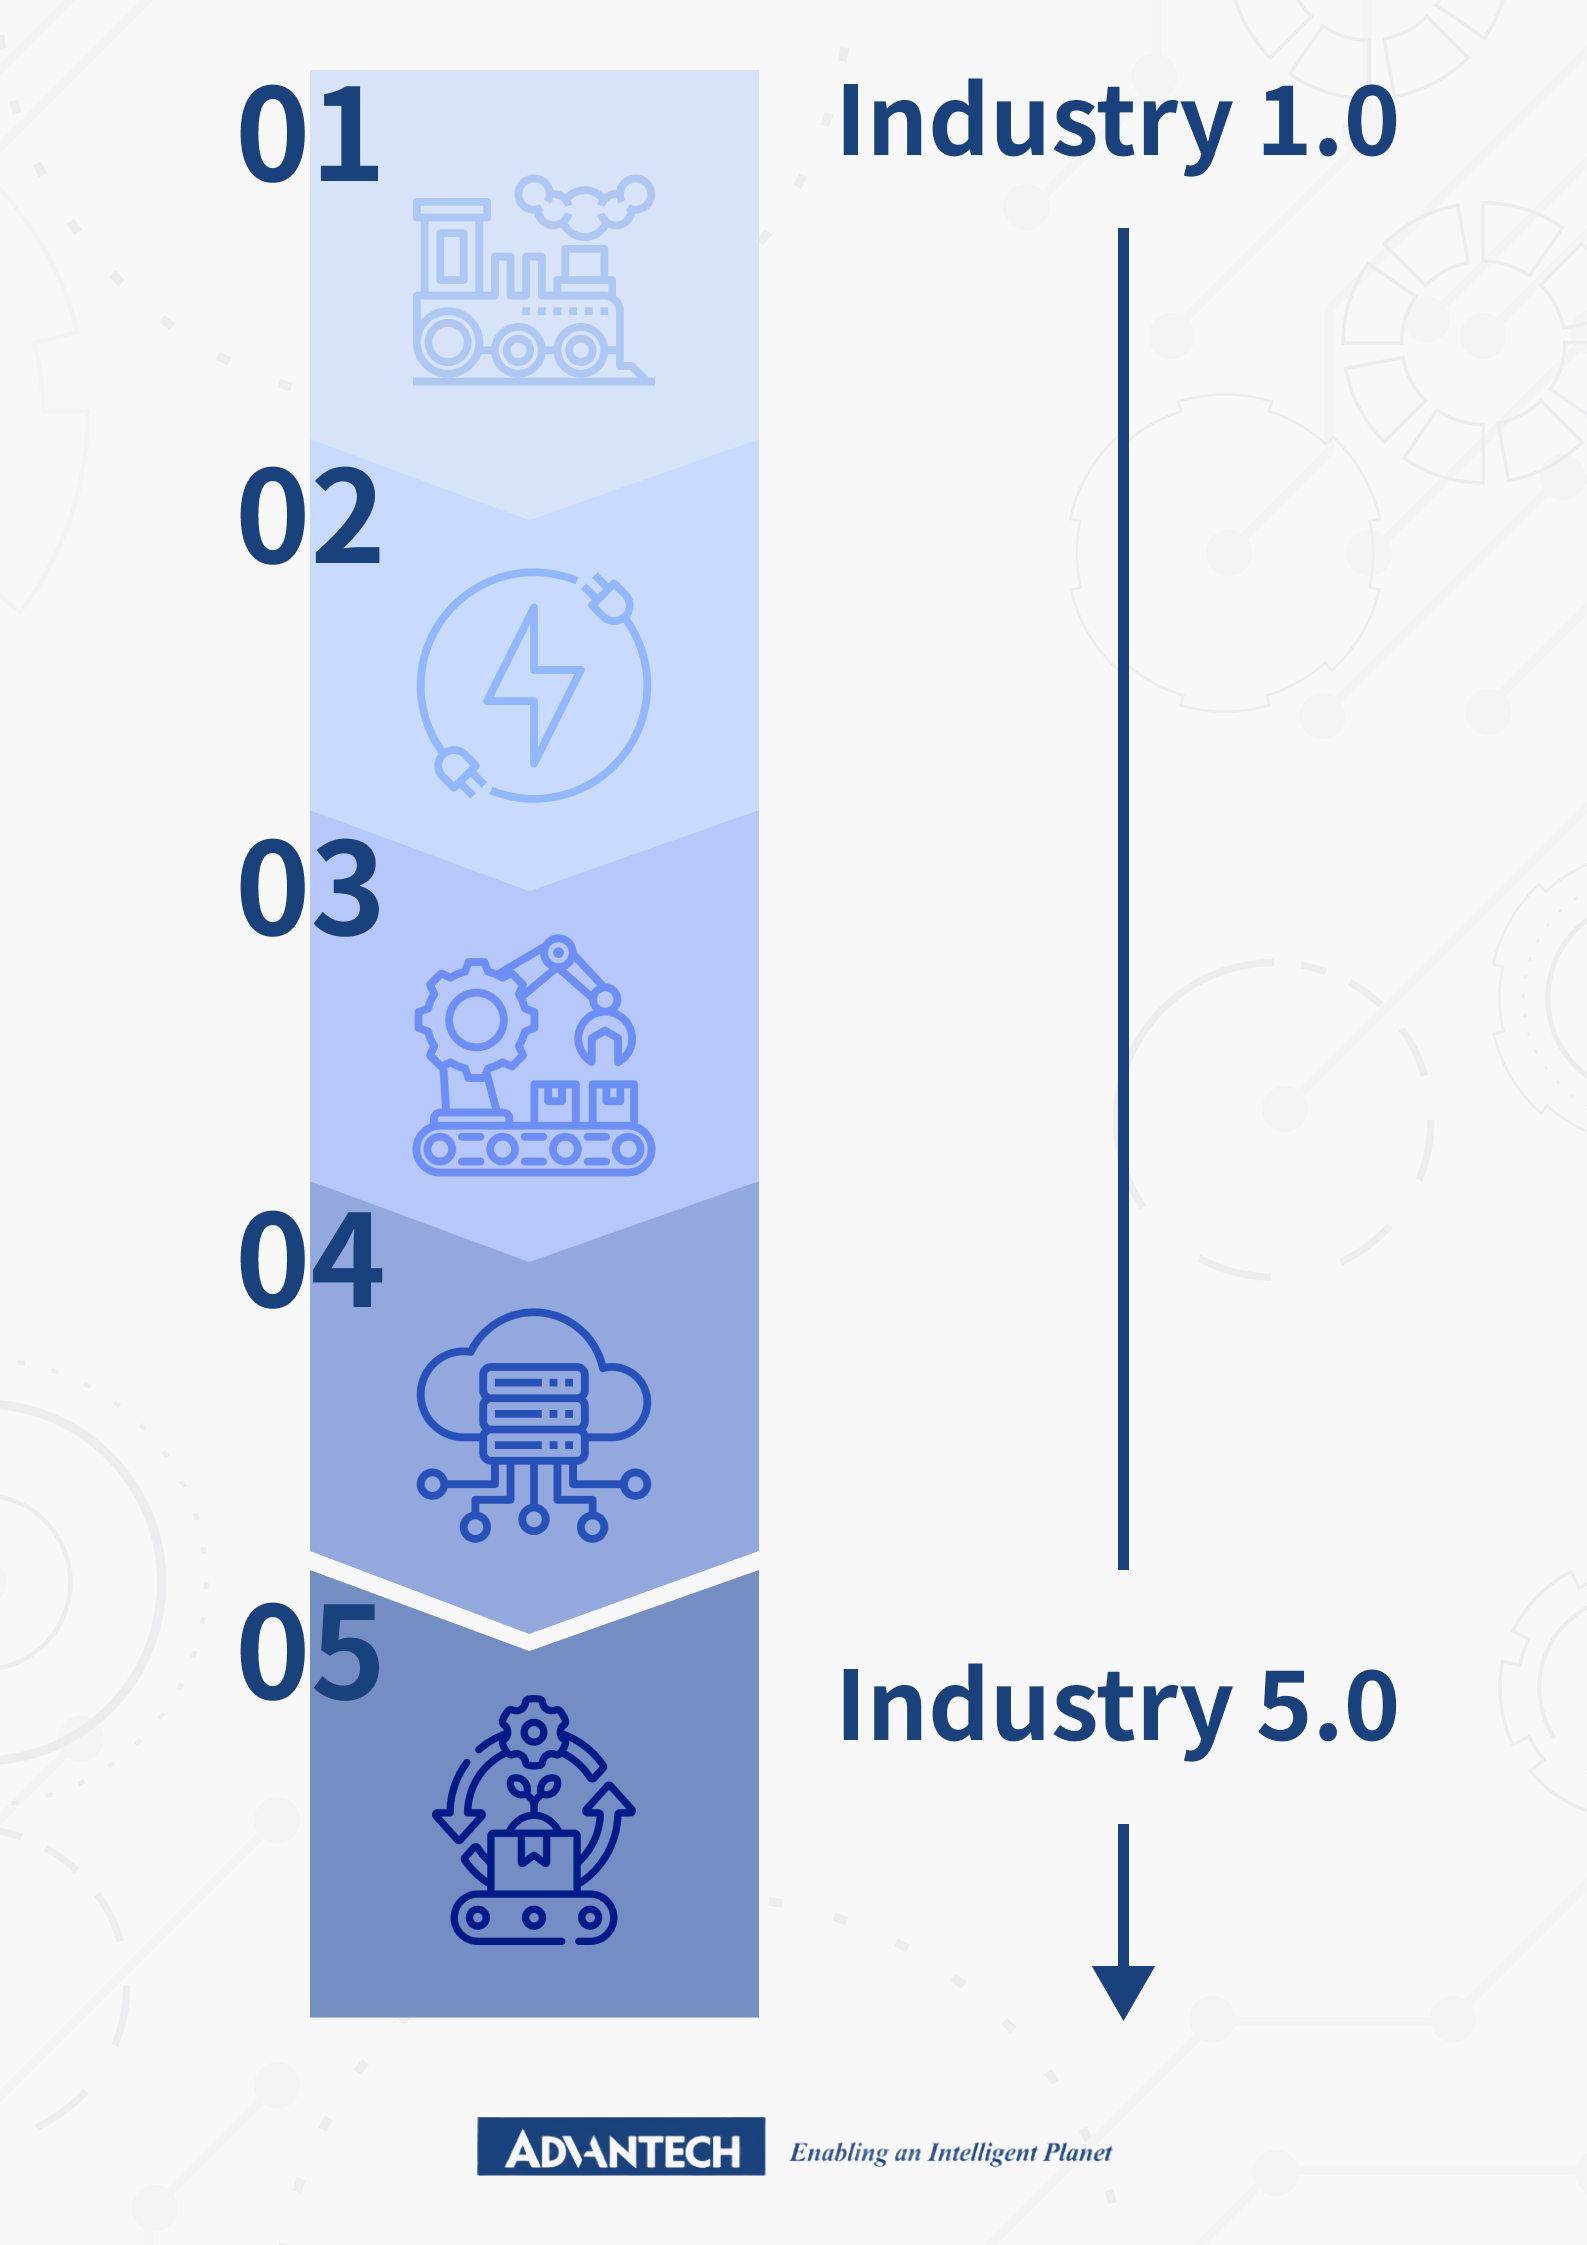 Evolution of industry from 1.0 to 5.0: Smart manufacturing revolutionizing production processes.